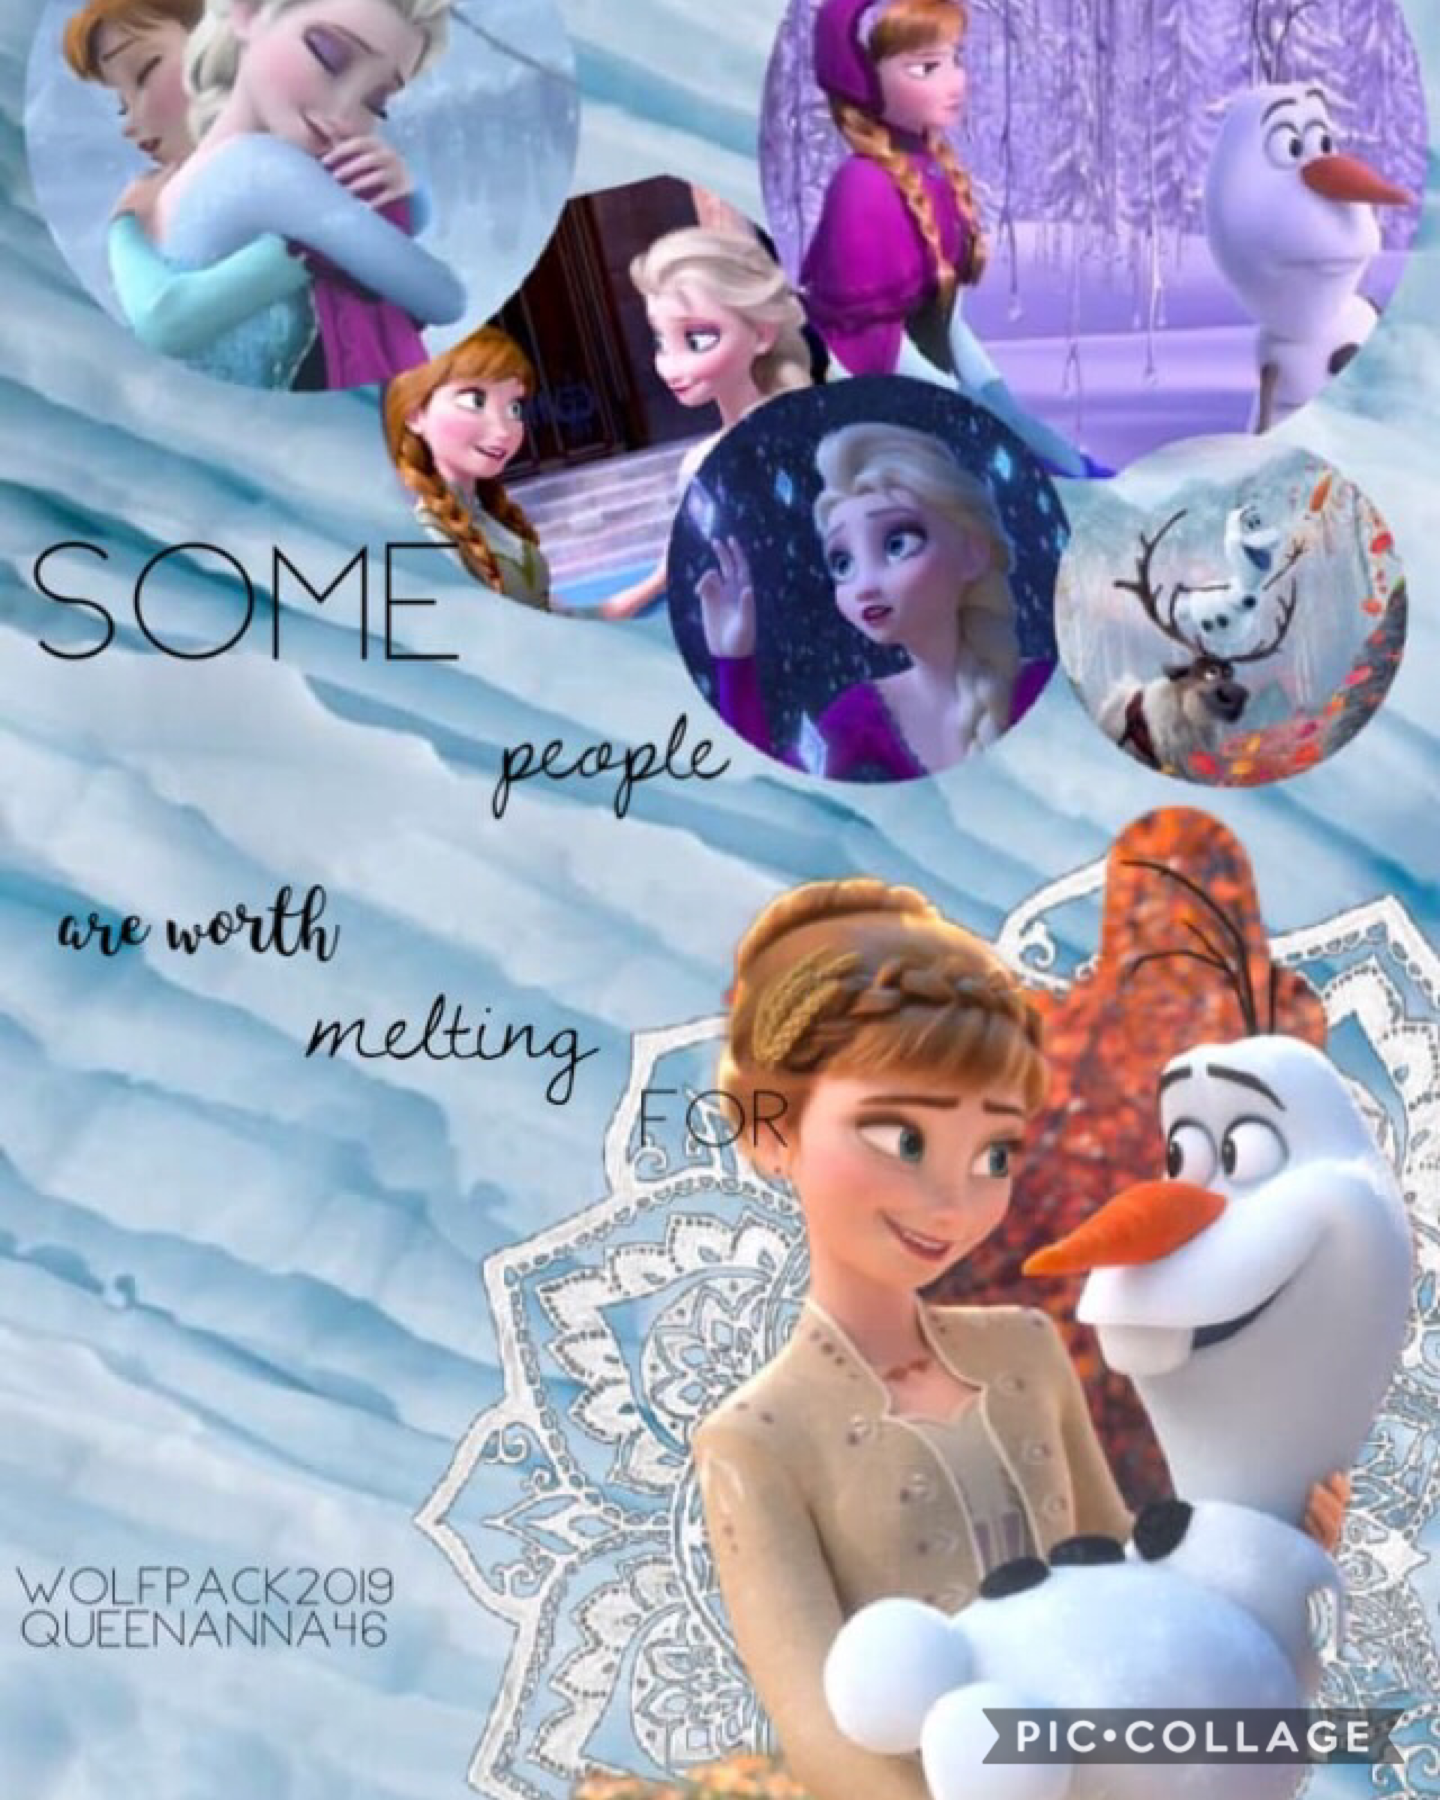 Frozen collage collaboration with Wolfpack2009